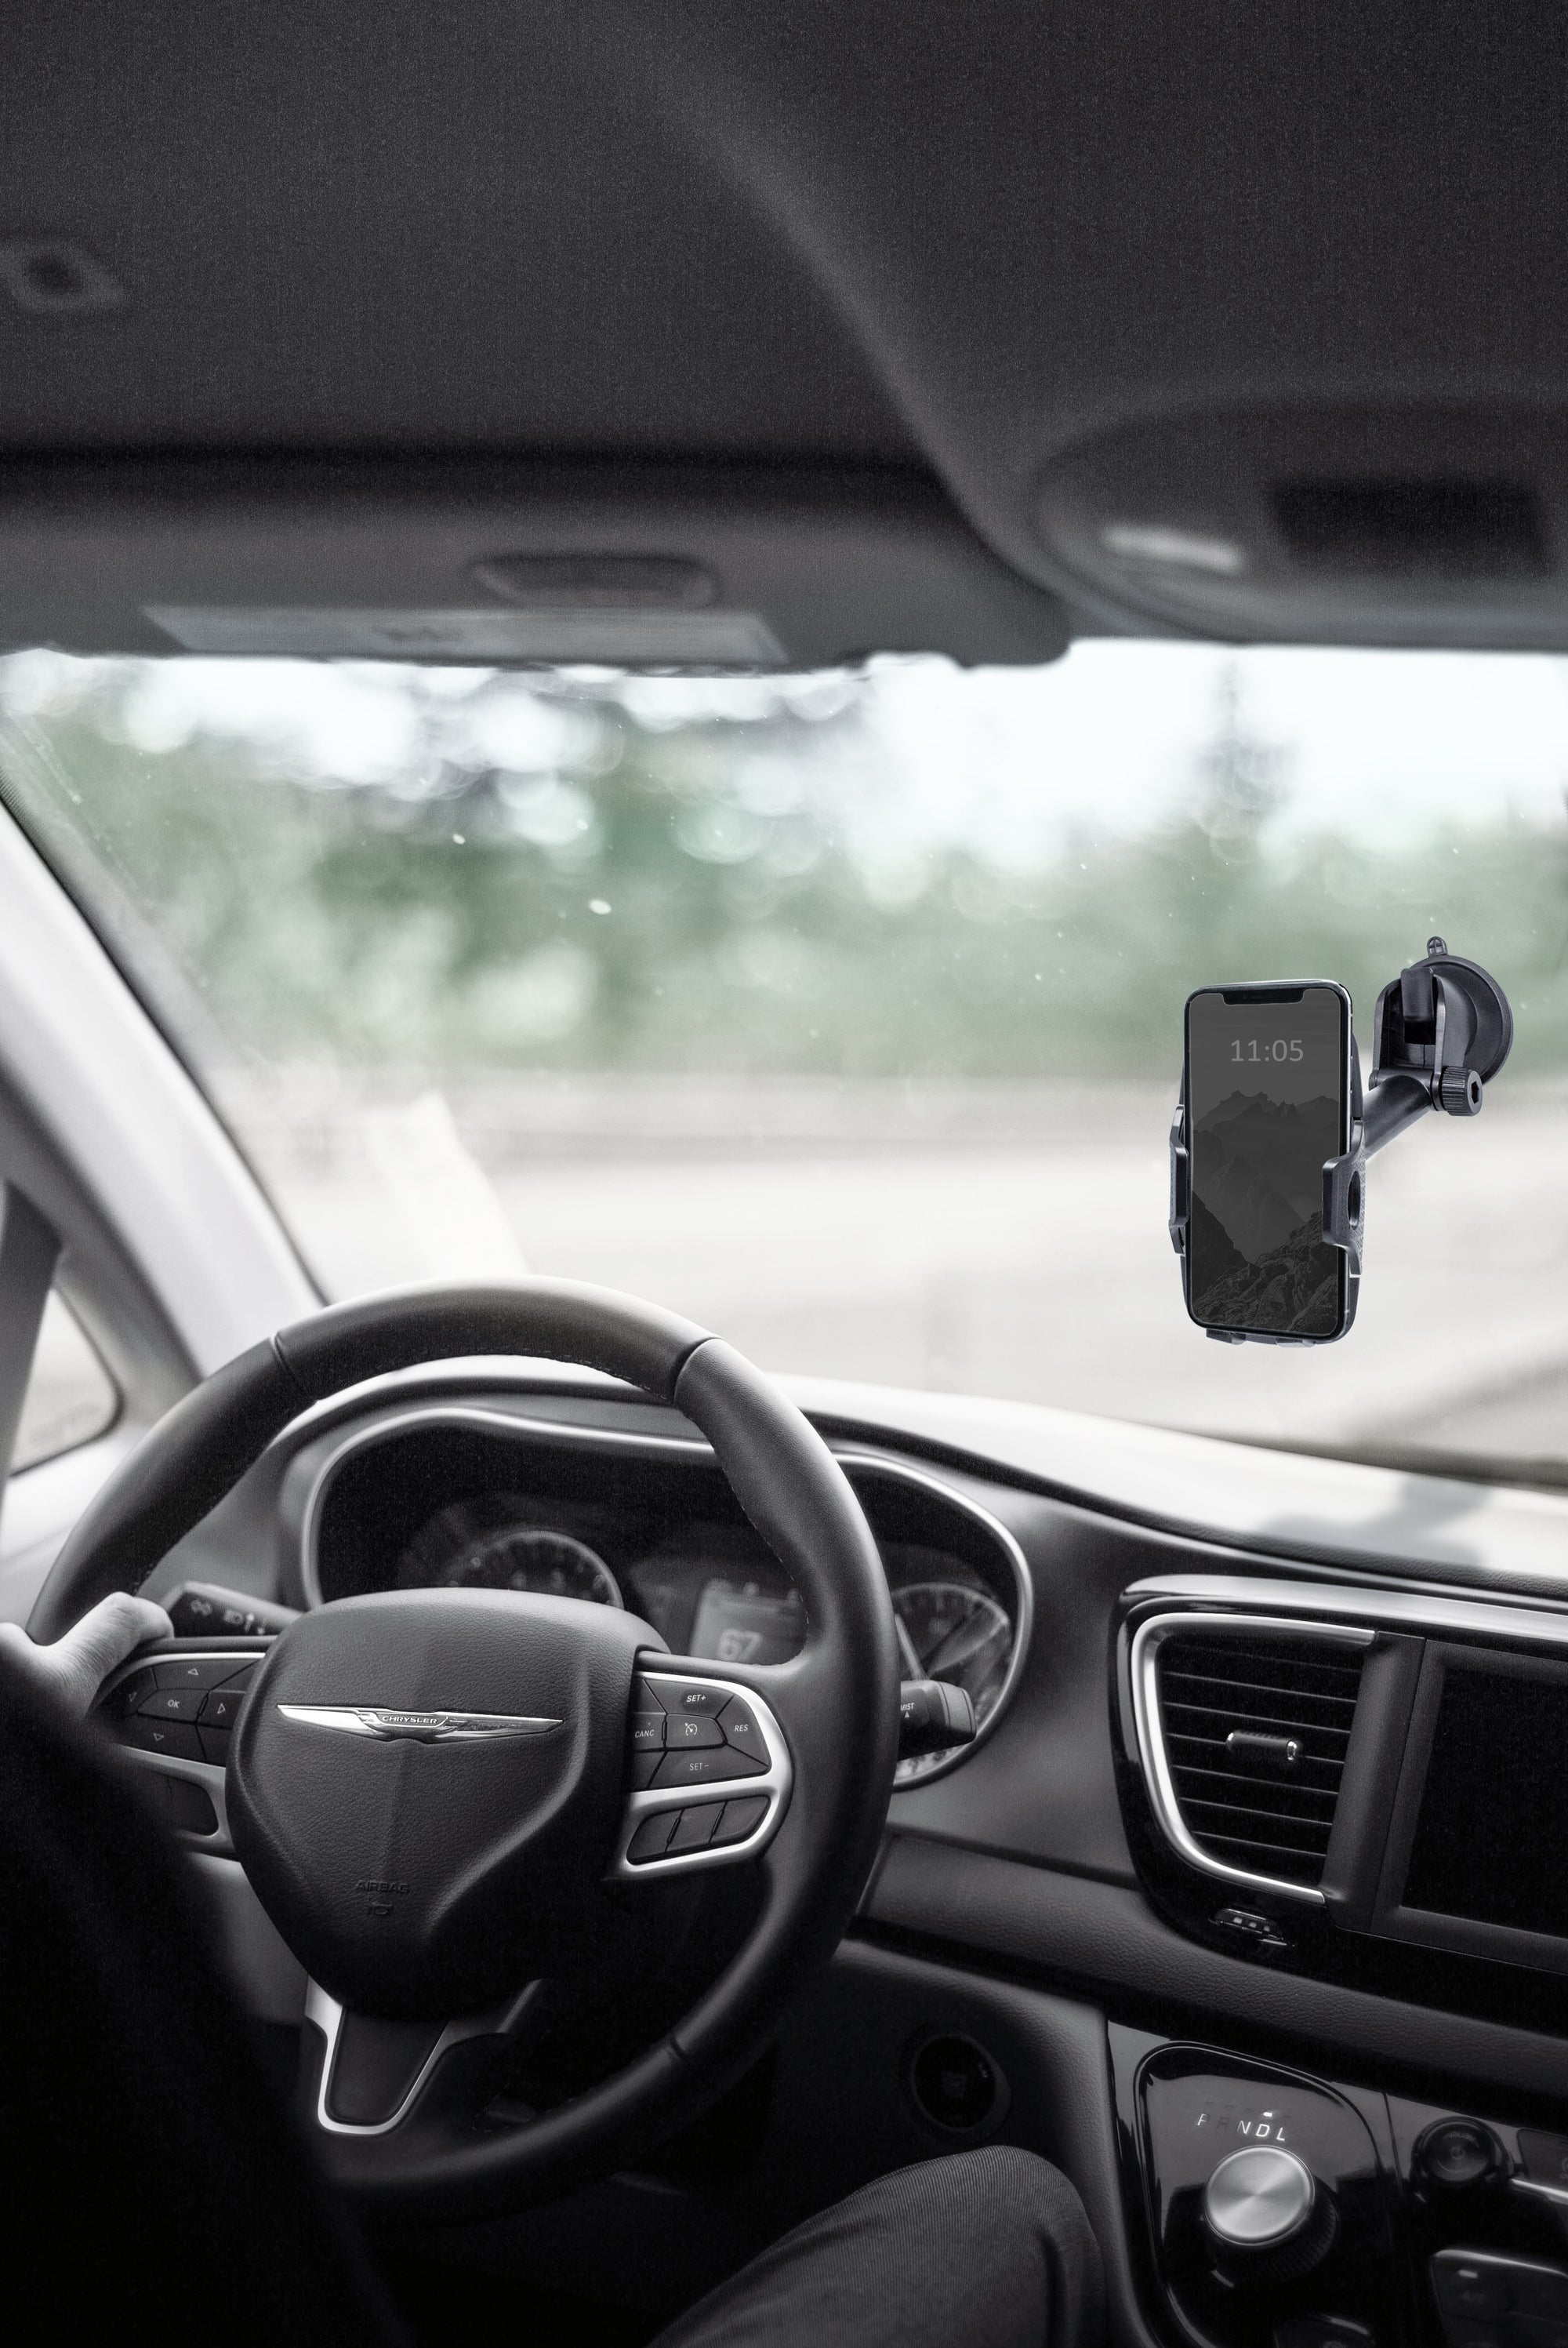 How to Install and Use Your Adreama Adjustable Universal Car Mount in 3 Easy Steps